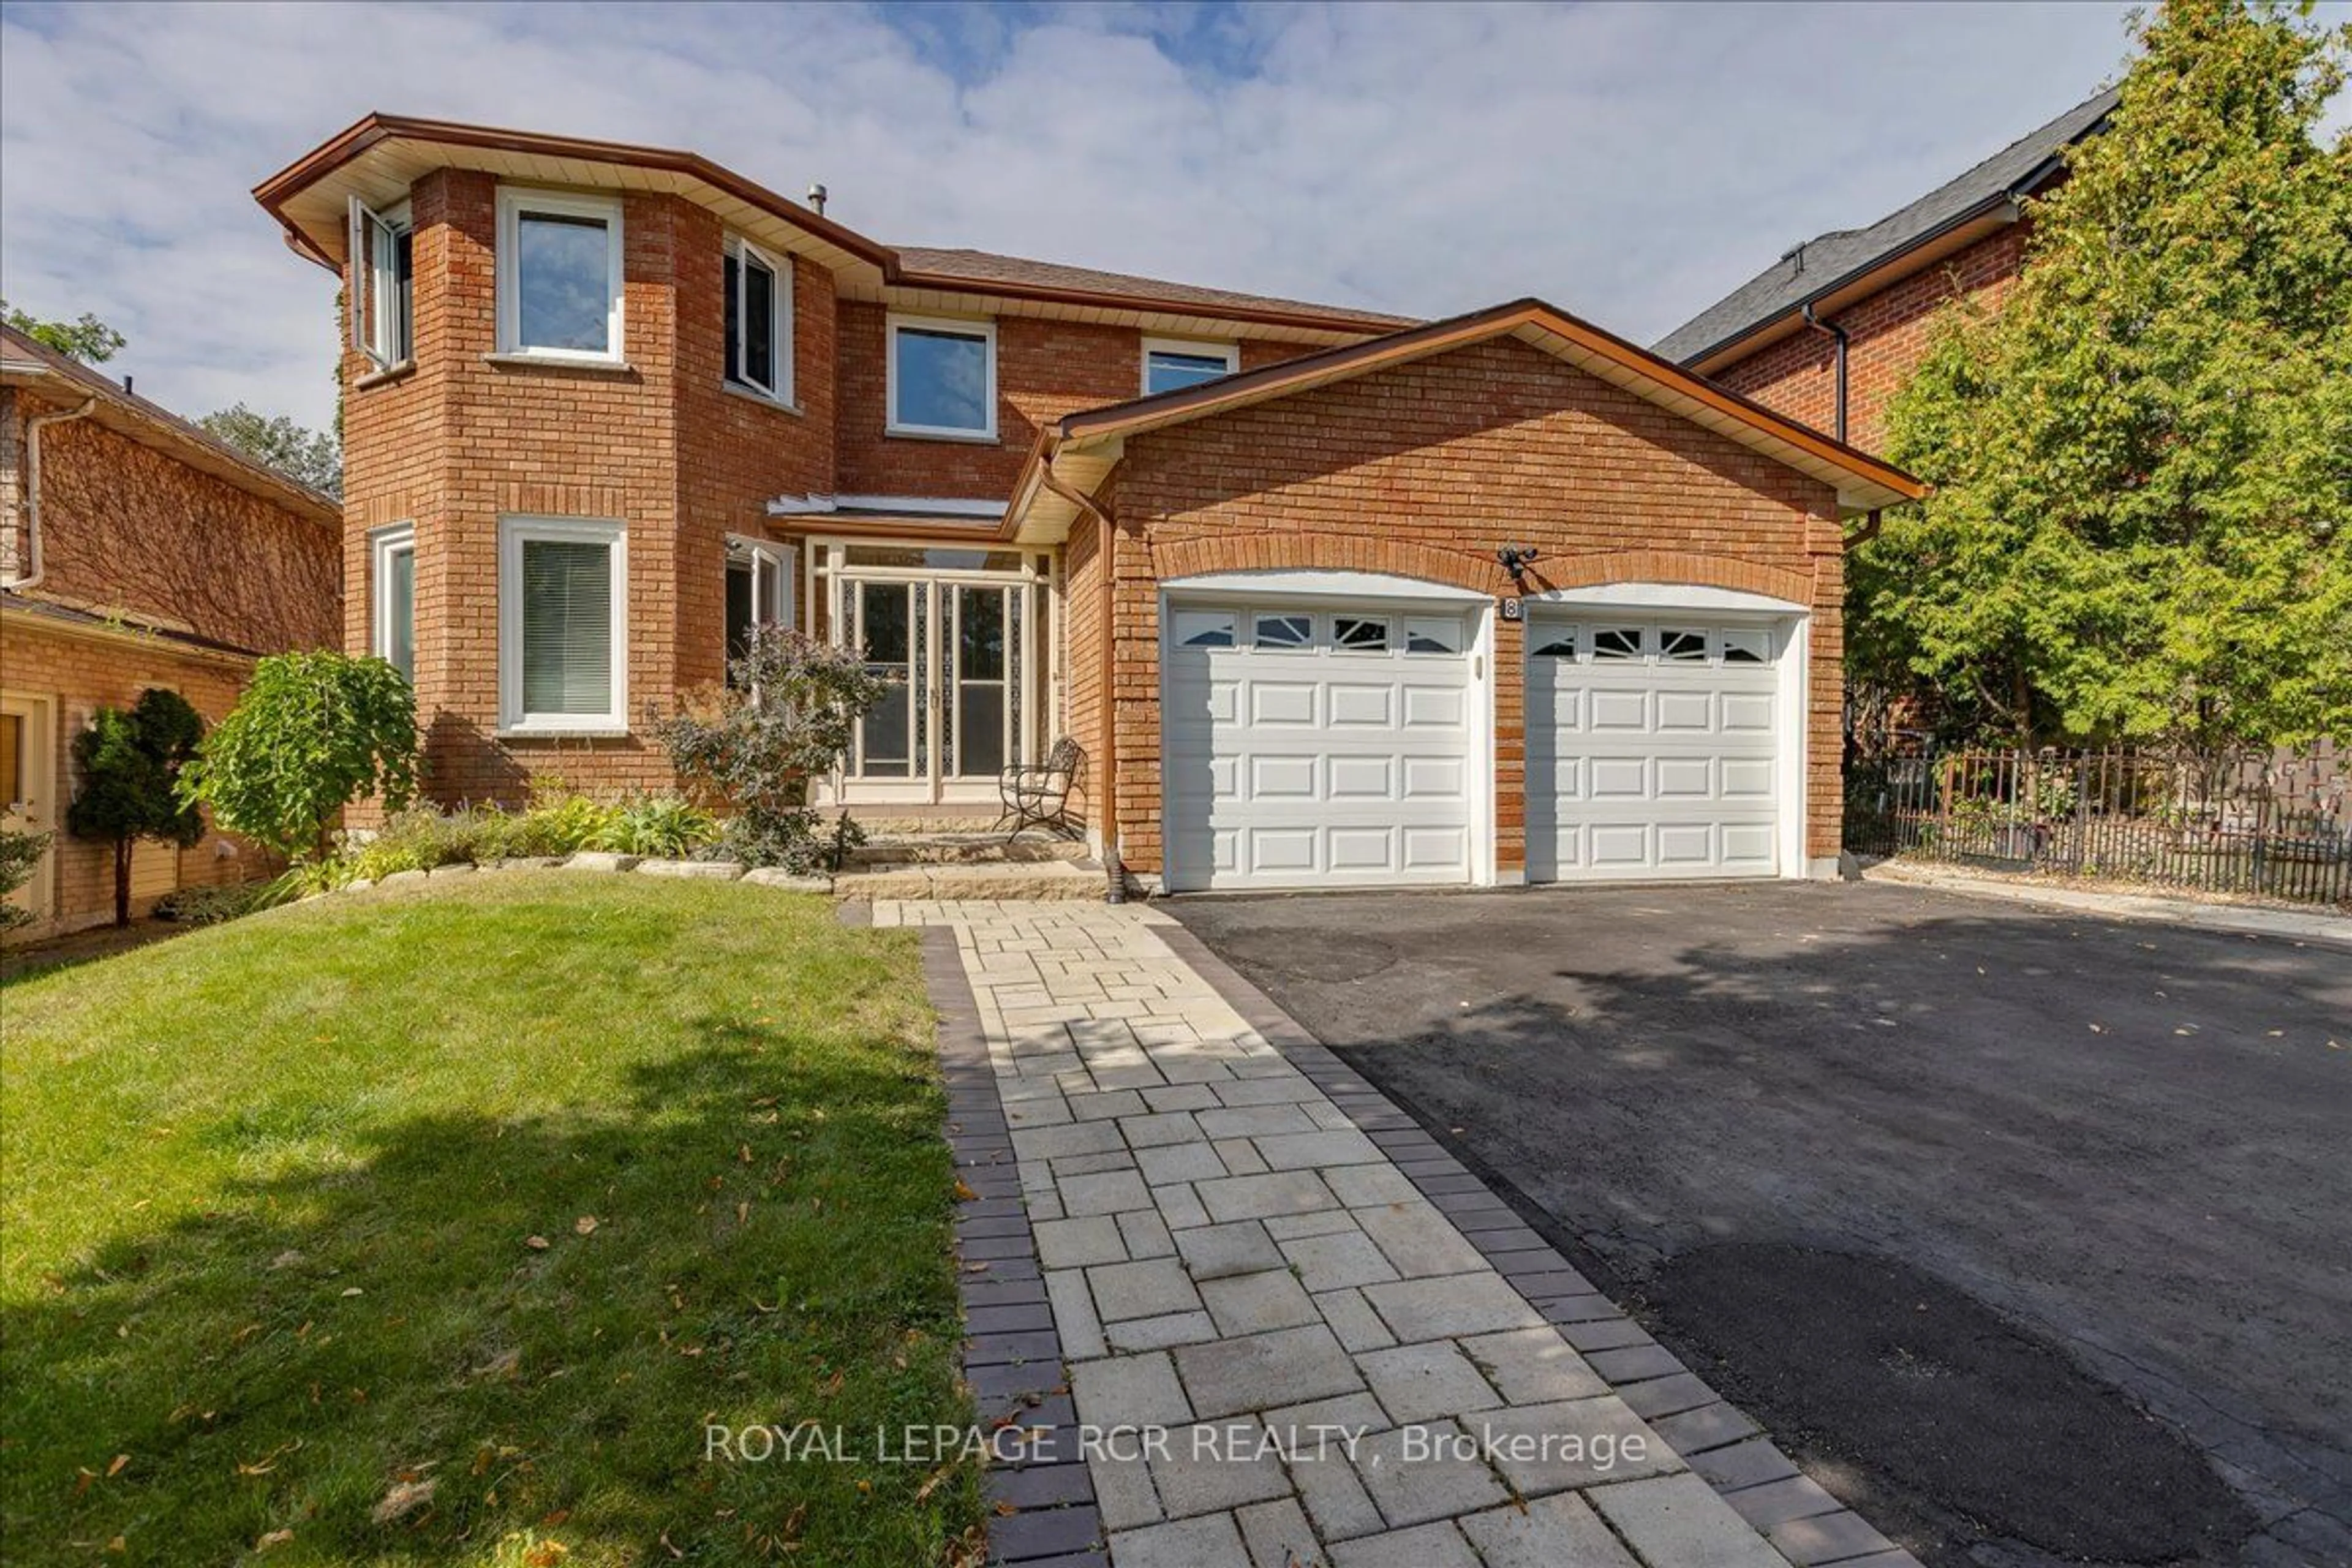 Home with brick exterior material for 8 Hiram Rd, Richmond Hill Ontario L4C 9G1